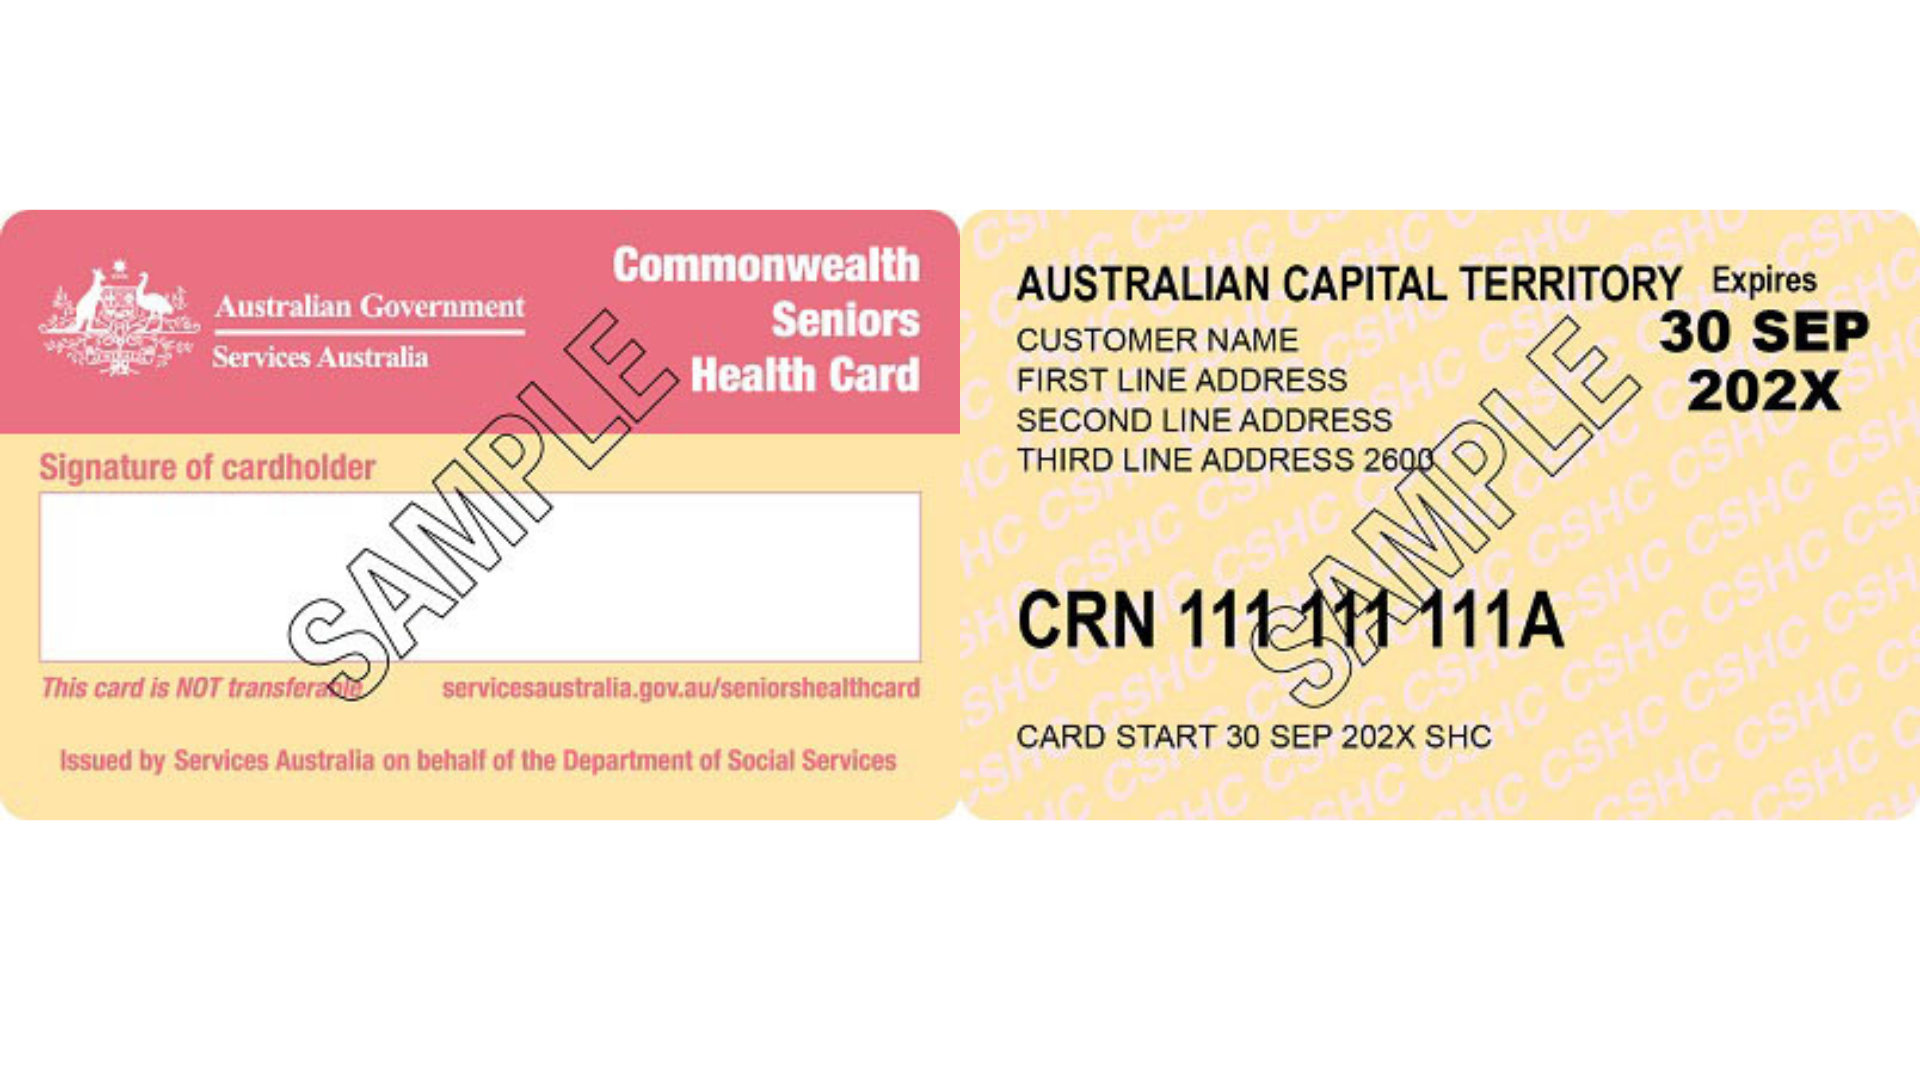 A Step-by-Step Guide to Filling Out Your Commonwealth Seniors Health Card Application